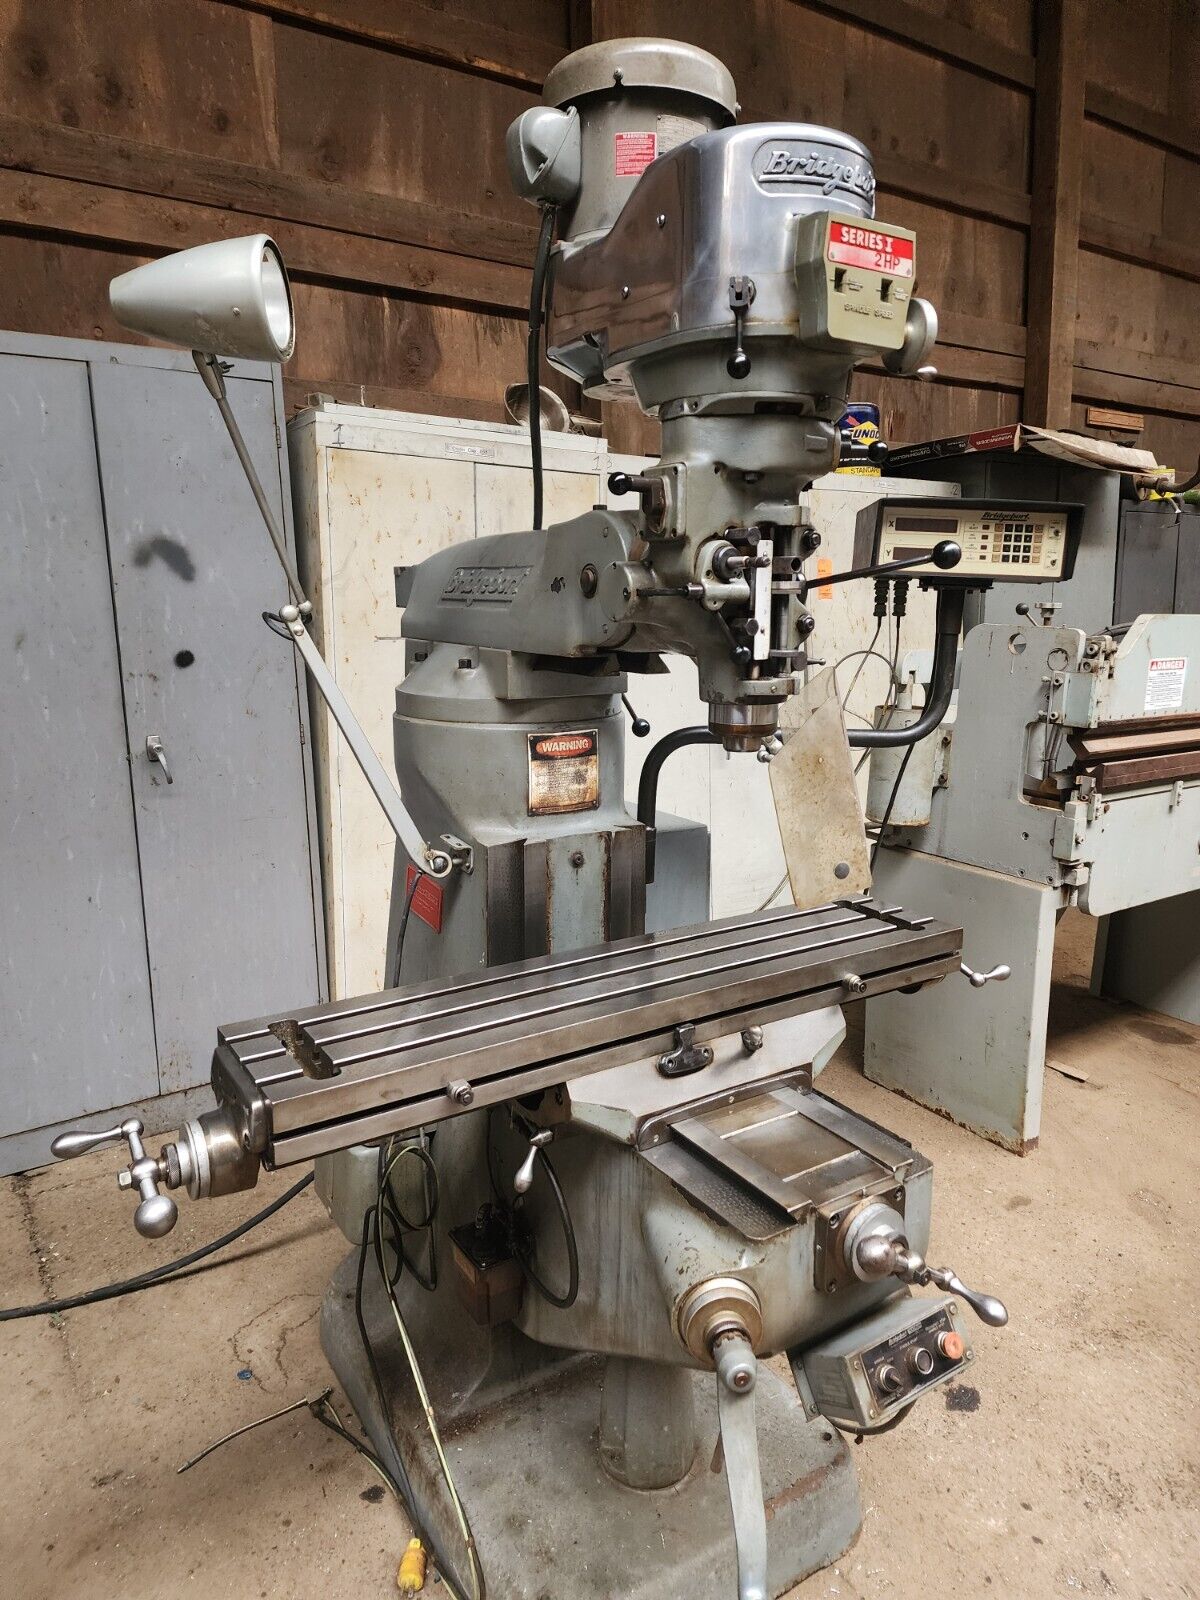 Exceptional Bridgeport Milling Machine W/ DRO Mist system one shot oil will ship